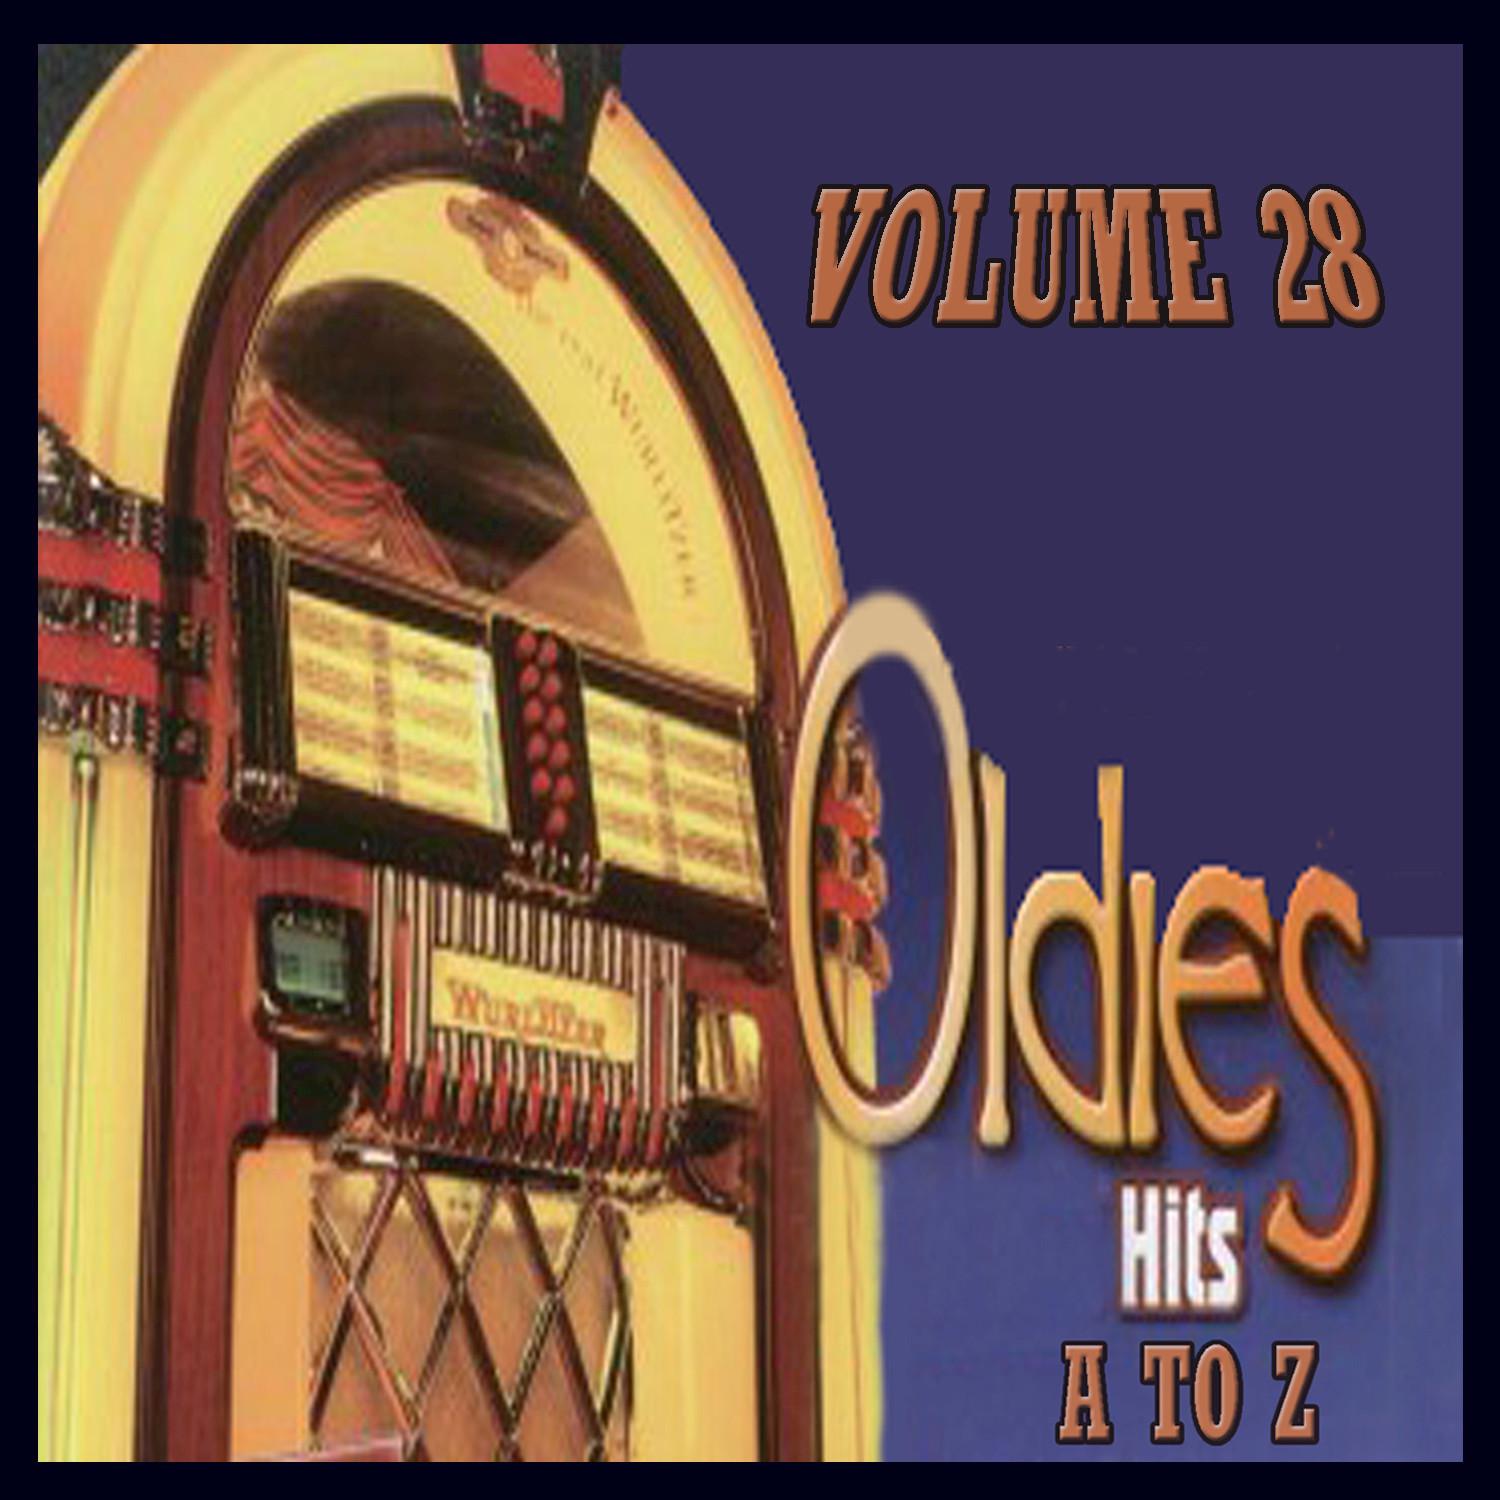 Oldies Hits A to Z, Vol. 28